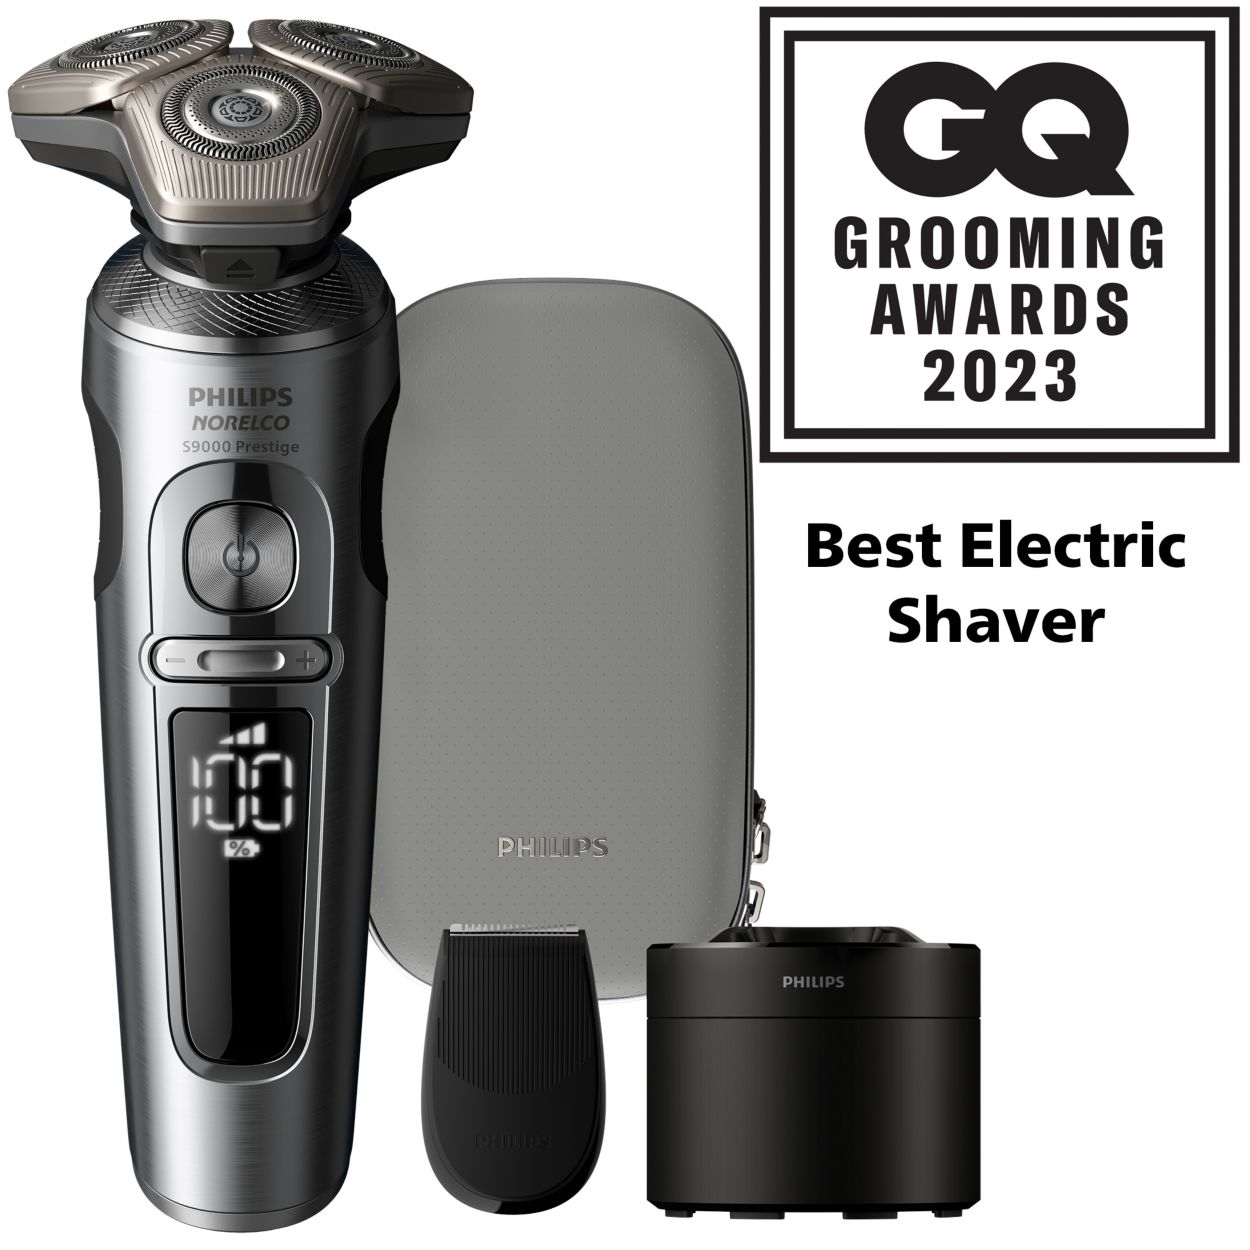 Wet & Dry Electric shaver with SenseIQ